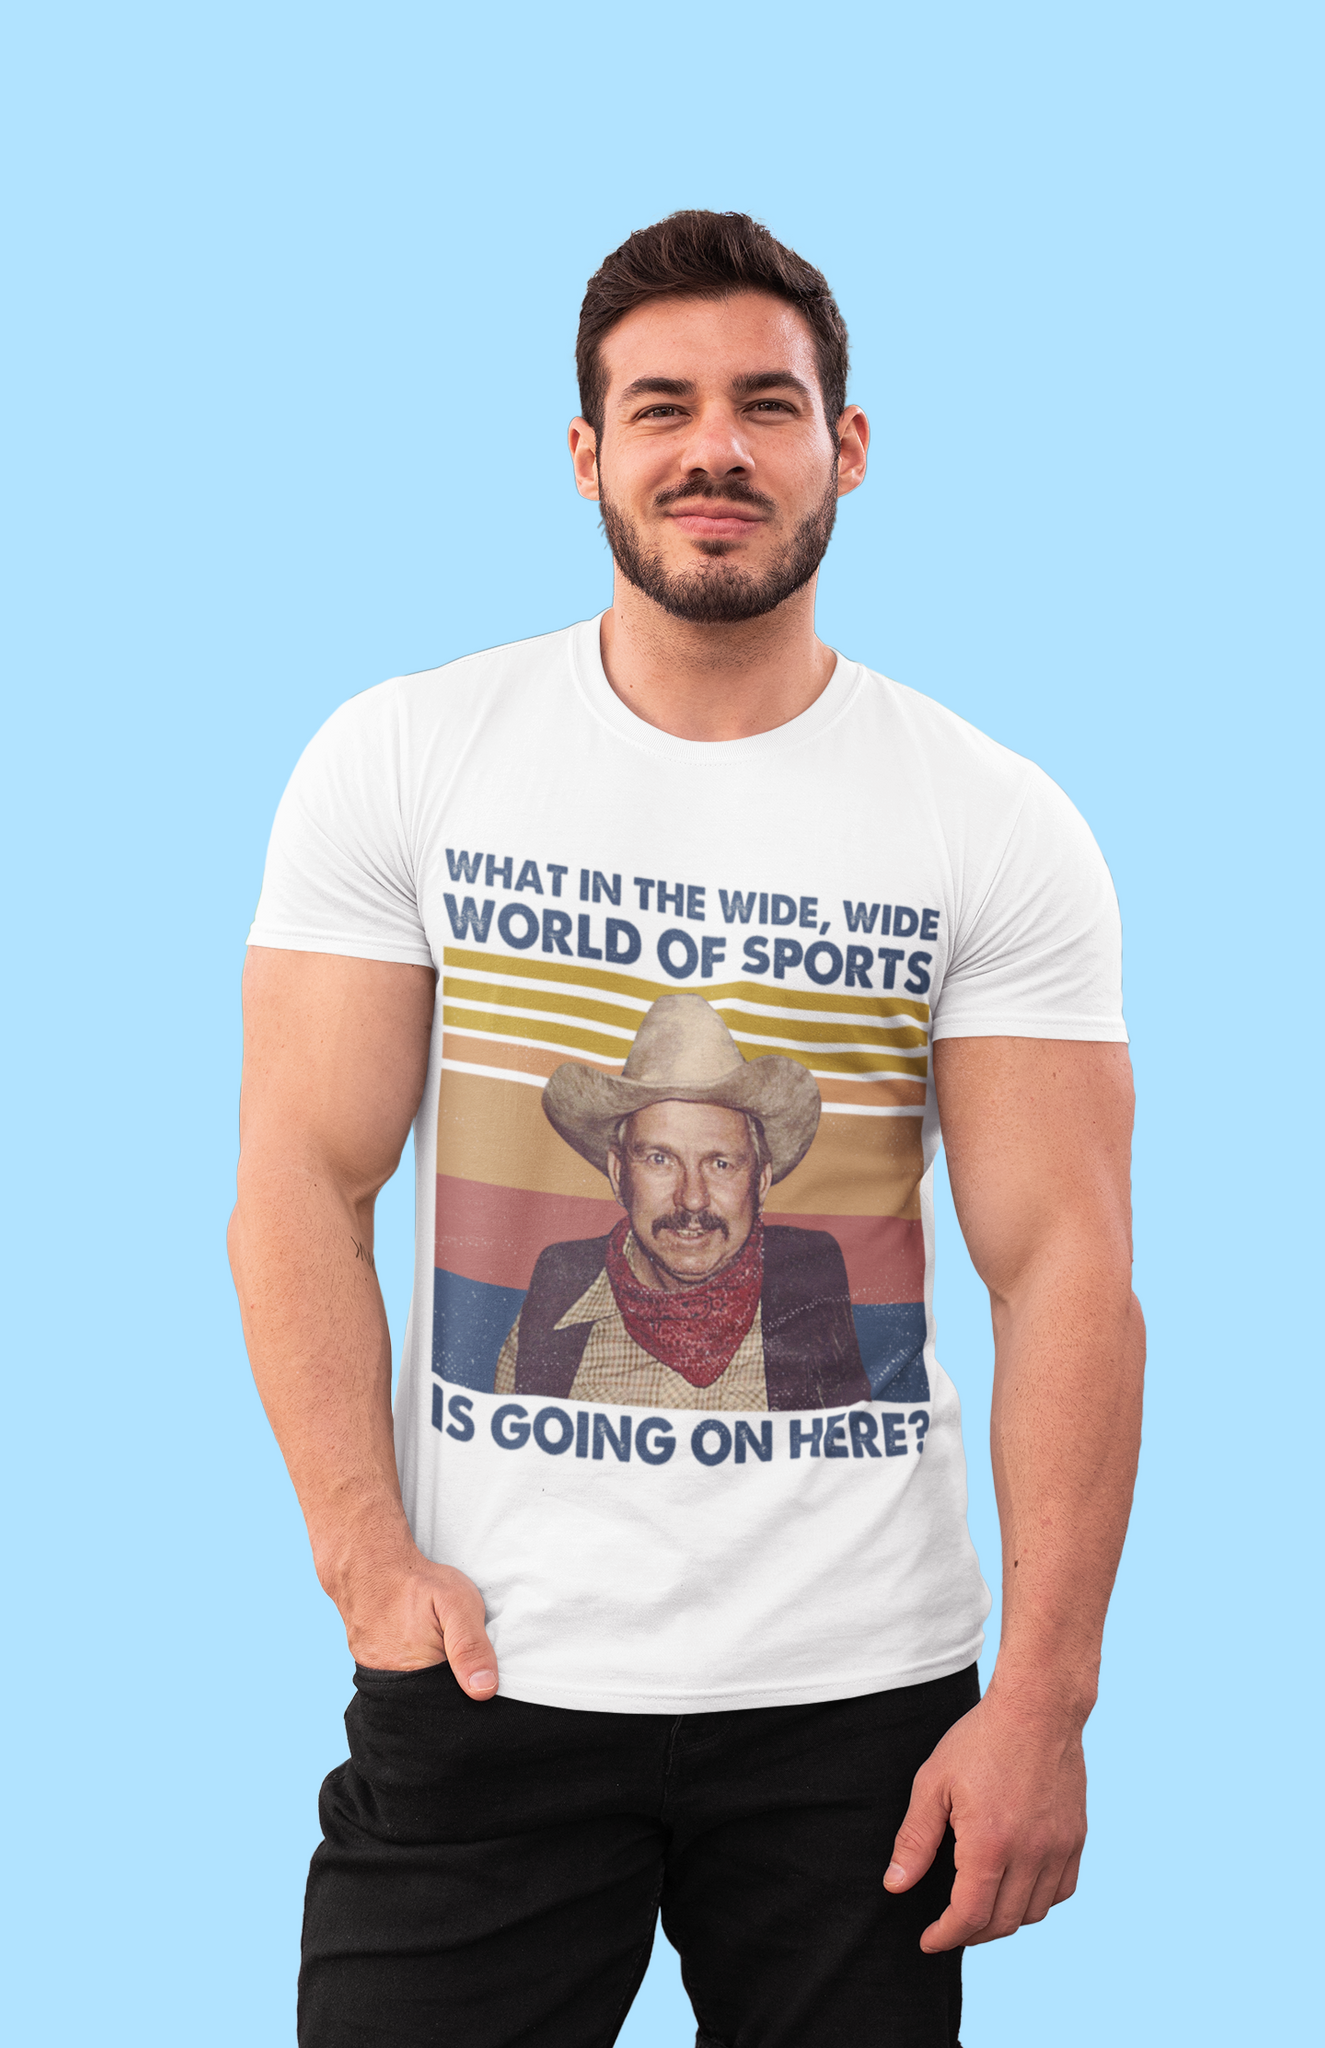 Blazing Saddles T Shirt, What In The Wide Wide World Of Sports Is Going On Here Tshirt, Taggart T Shirt